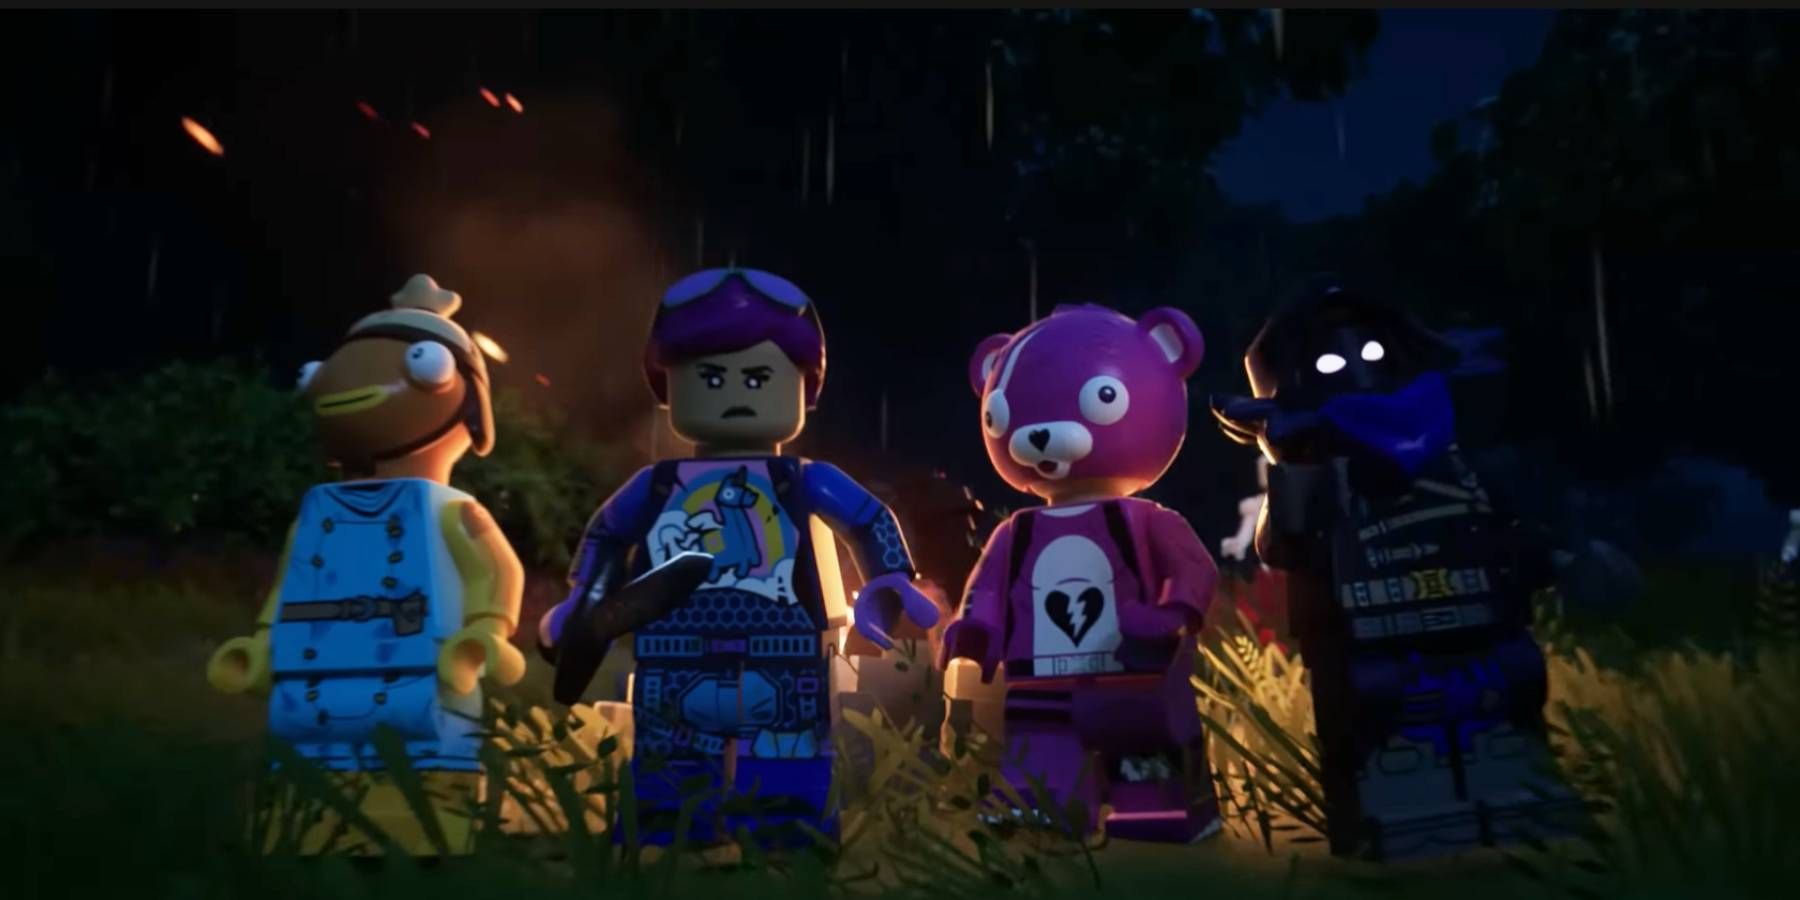 Several LEGO skins gathered at night in a LEGO Fortnite trailer